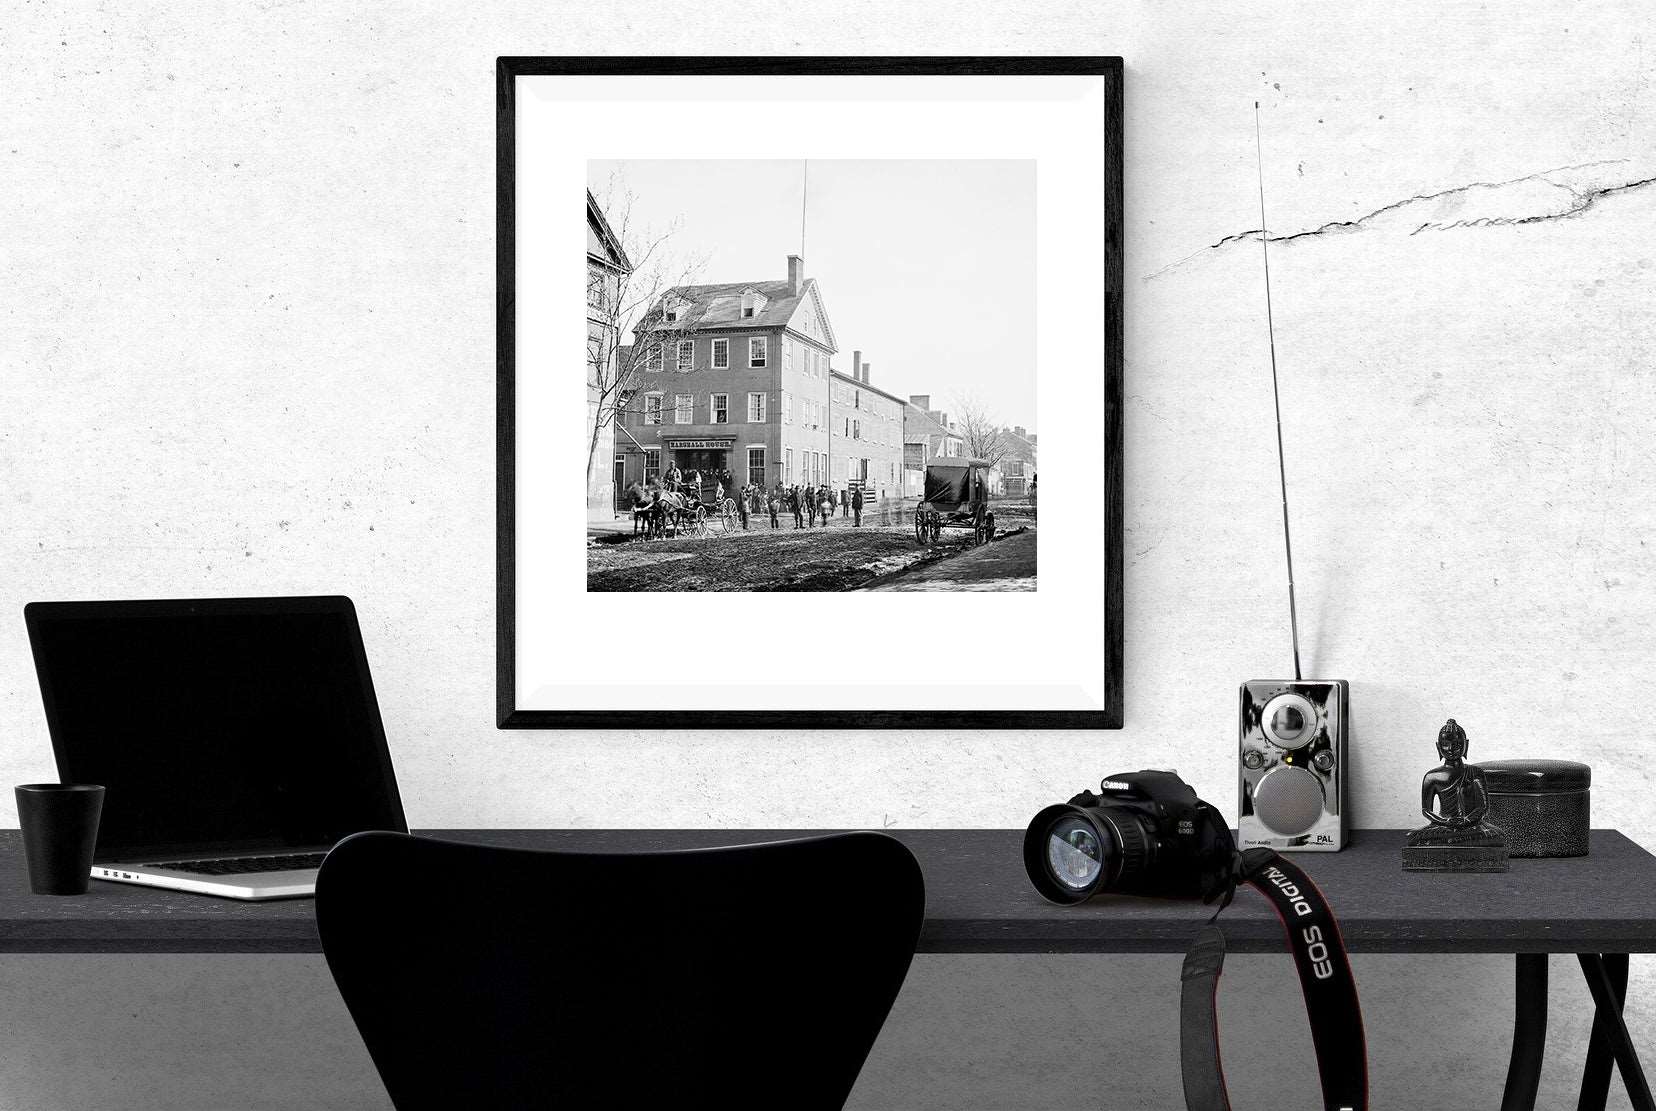 A framed paper print of a photograph of the Marshall House in Alexandria hanging above a work desk